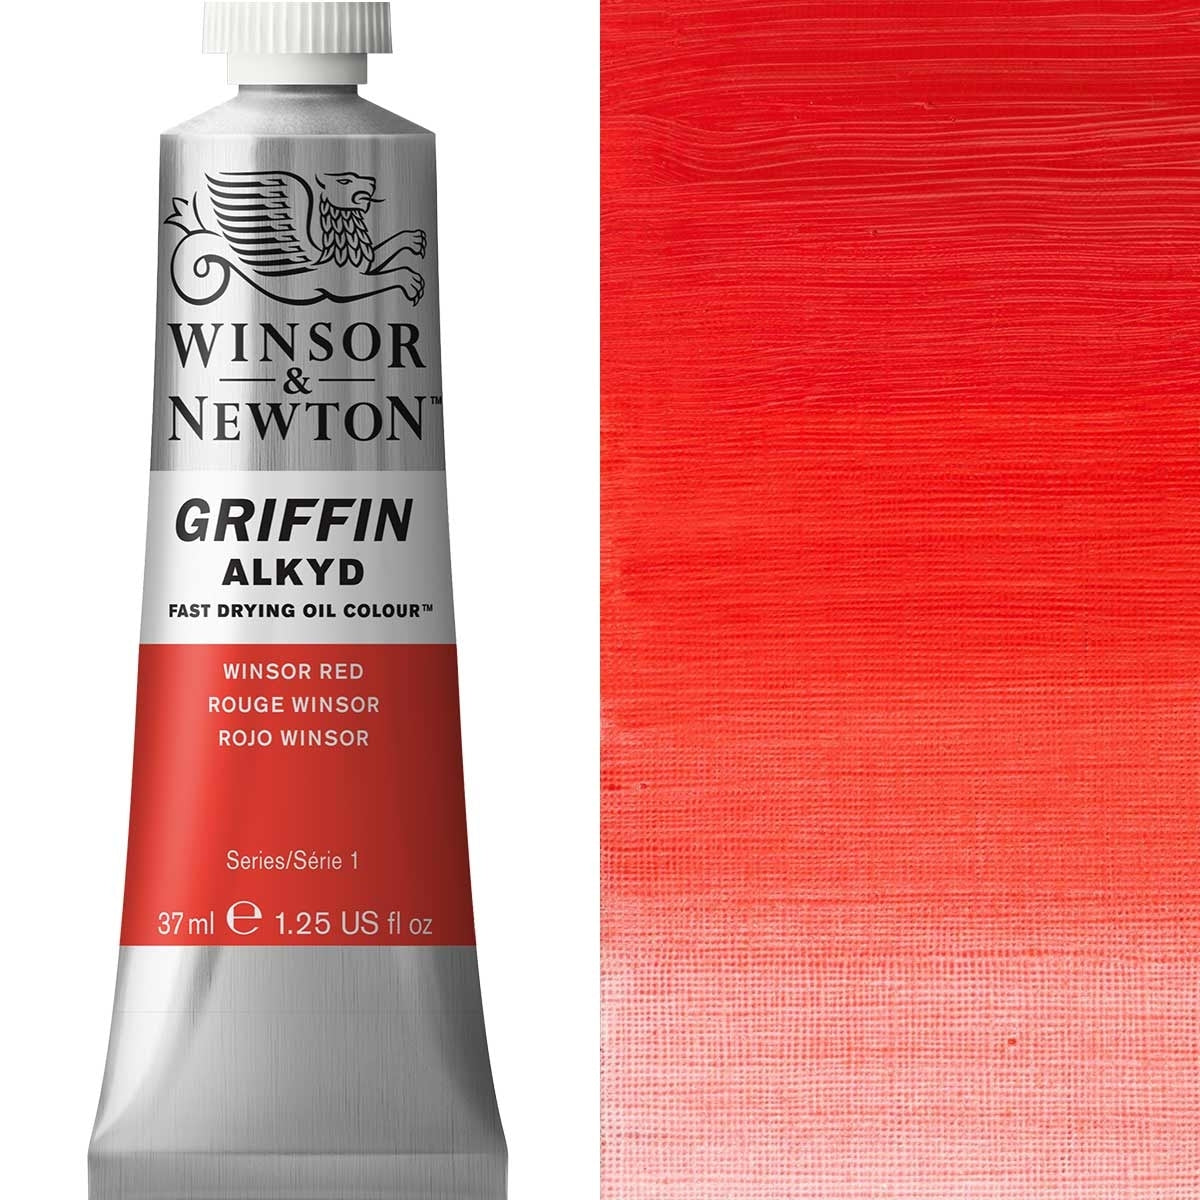 Winsor and Newton - Griffin ALKYD Oil Colour - 37ml - Winsor Red